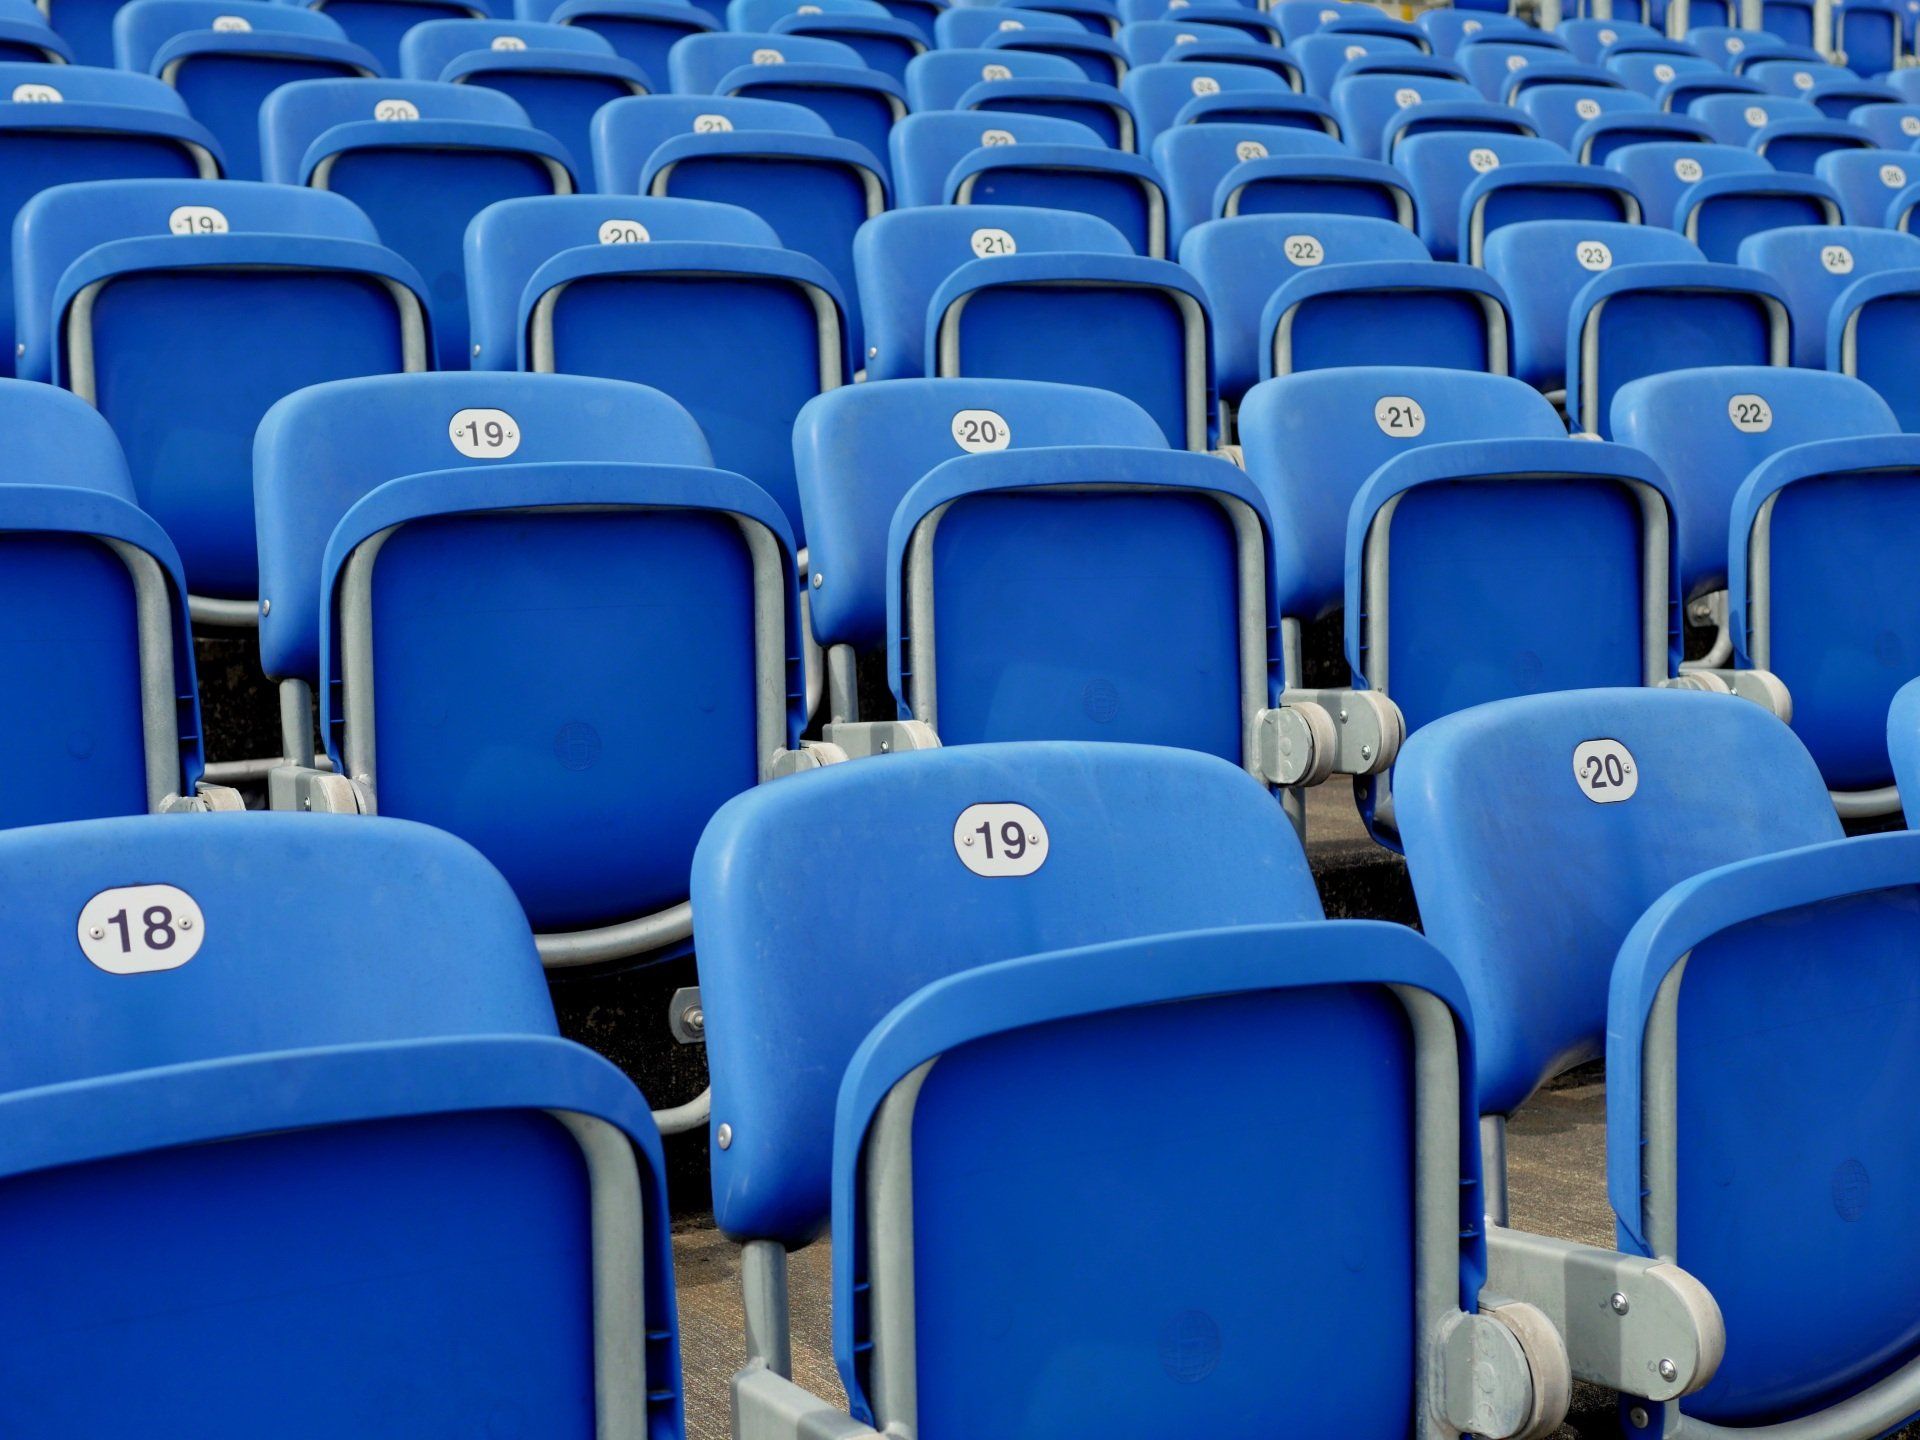 Rows of blue seats in a stadium with numbers on them